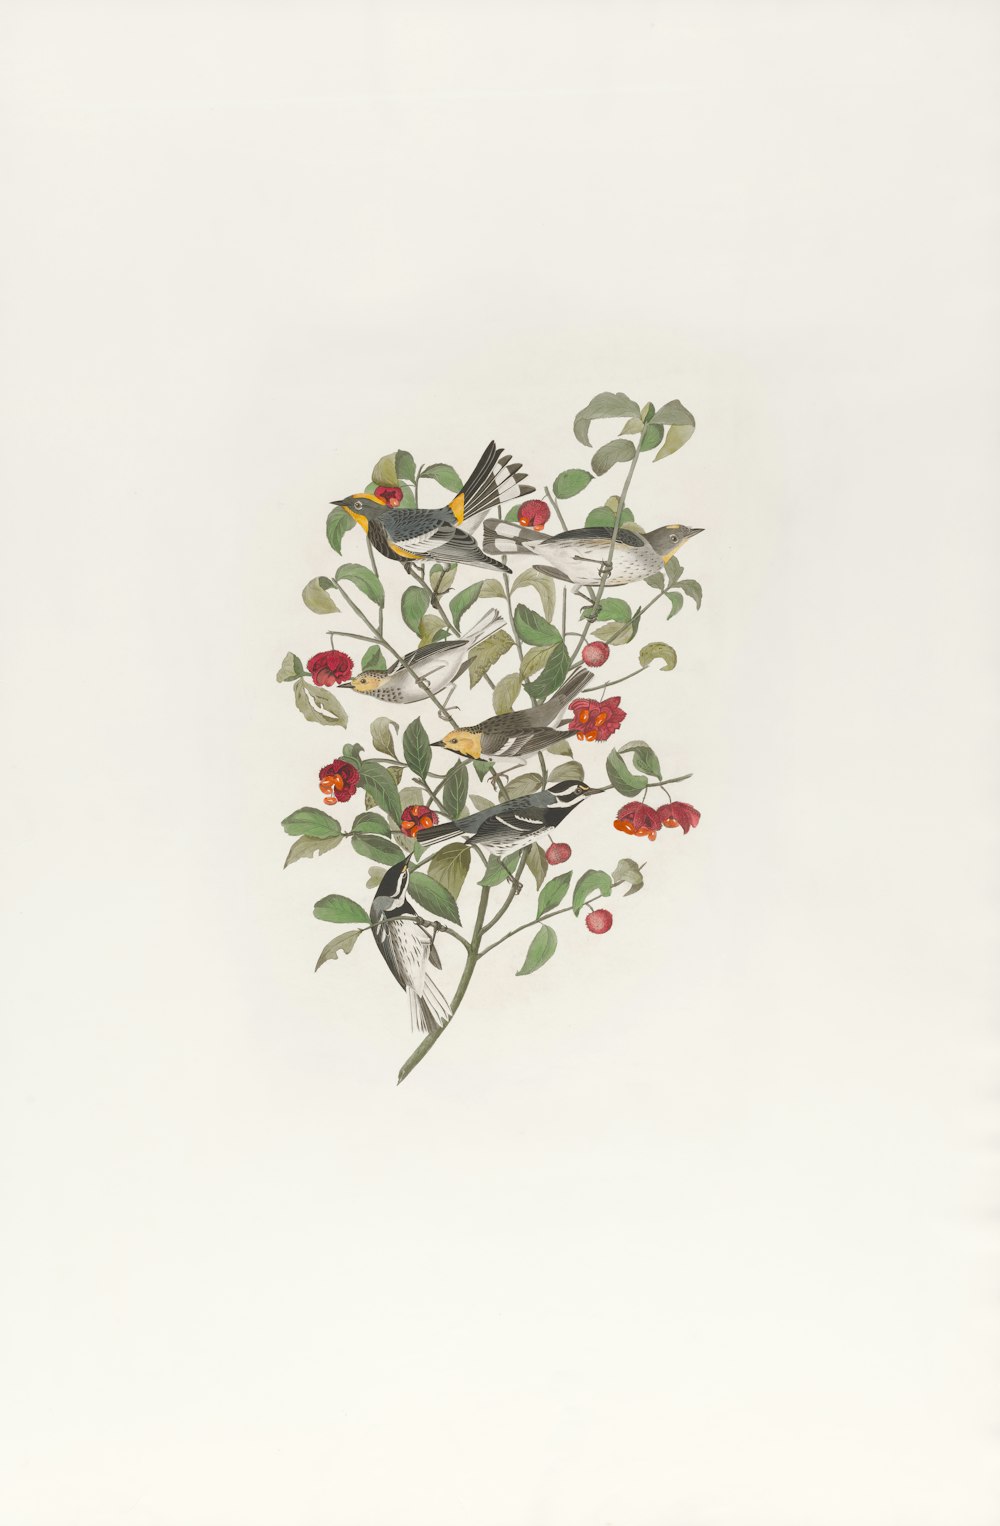 a painting of birds on a branch with red berries